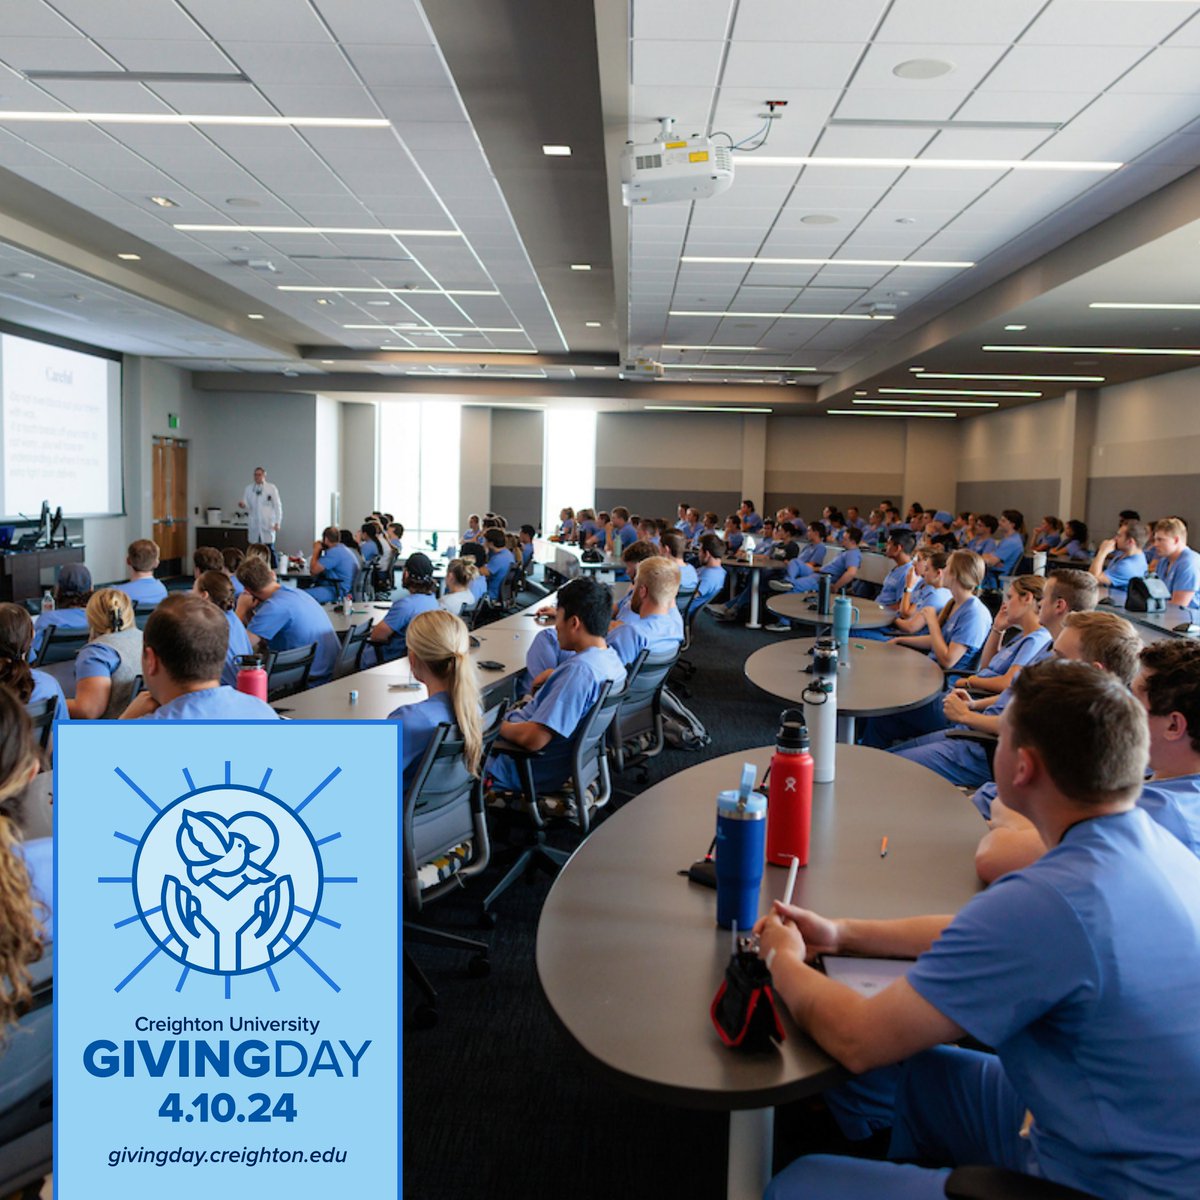 We’re almost to our goal of 75 donors! Make a gift of any size to the School of Dentistry to help us unlock an additional $10,000! #JaysGive givingday.creighton.edu/pages/school-o….